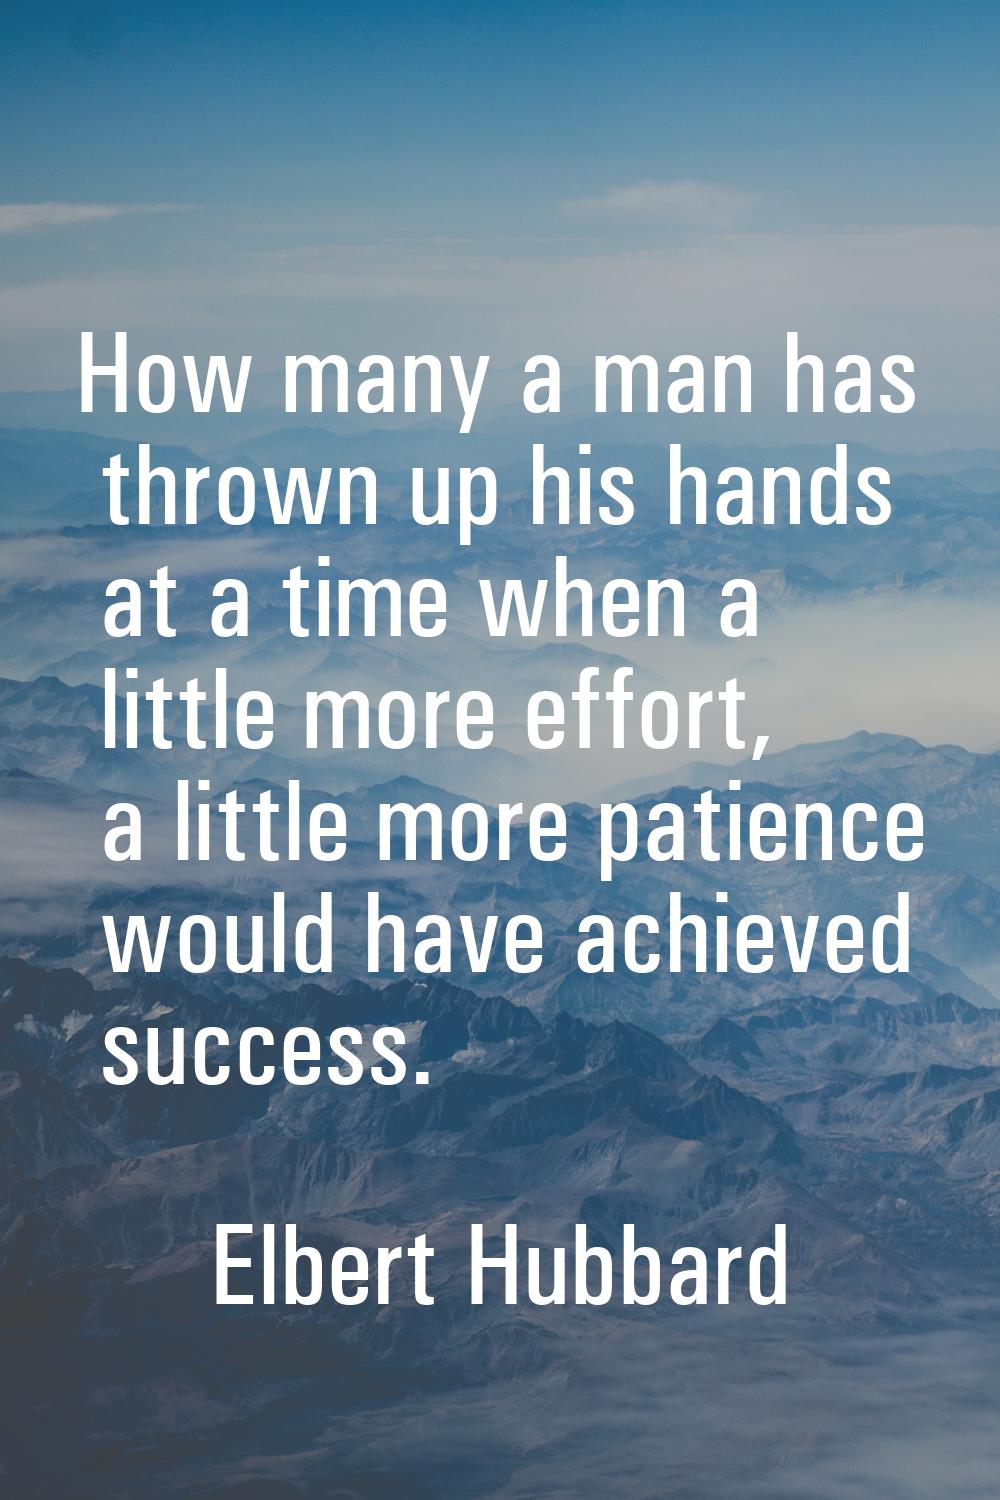 How many a man has thrown up his hands at a time when a little more effort, a little more patience 